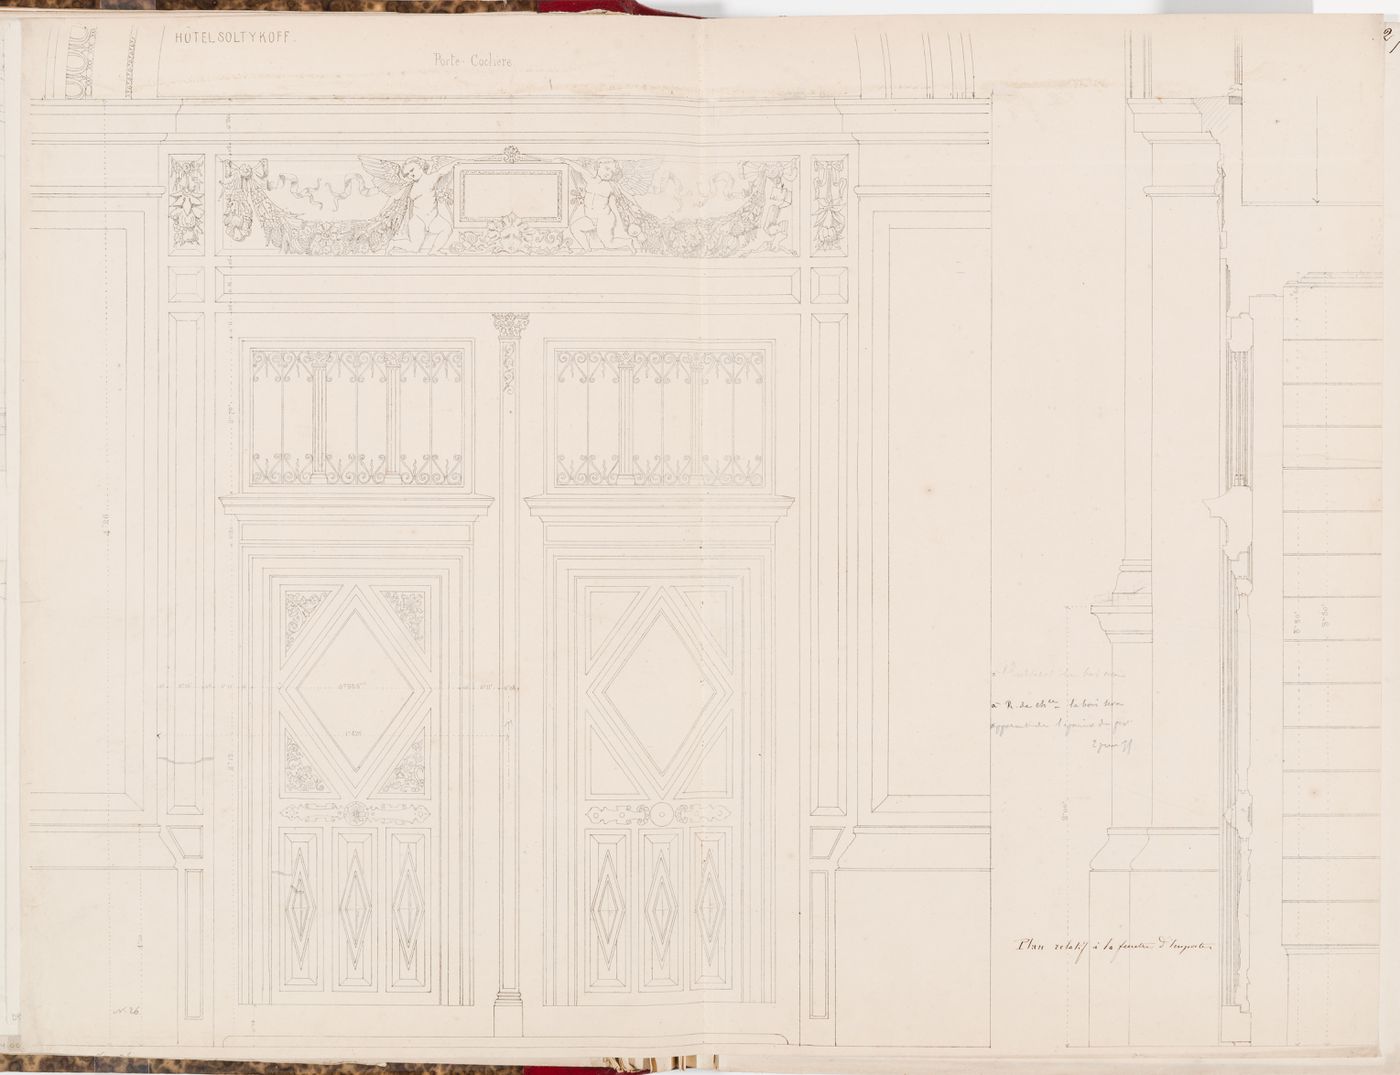 Elevation and wall section for the porte cochere entrance doors, Hôtel Soltykoff